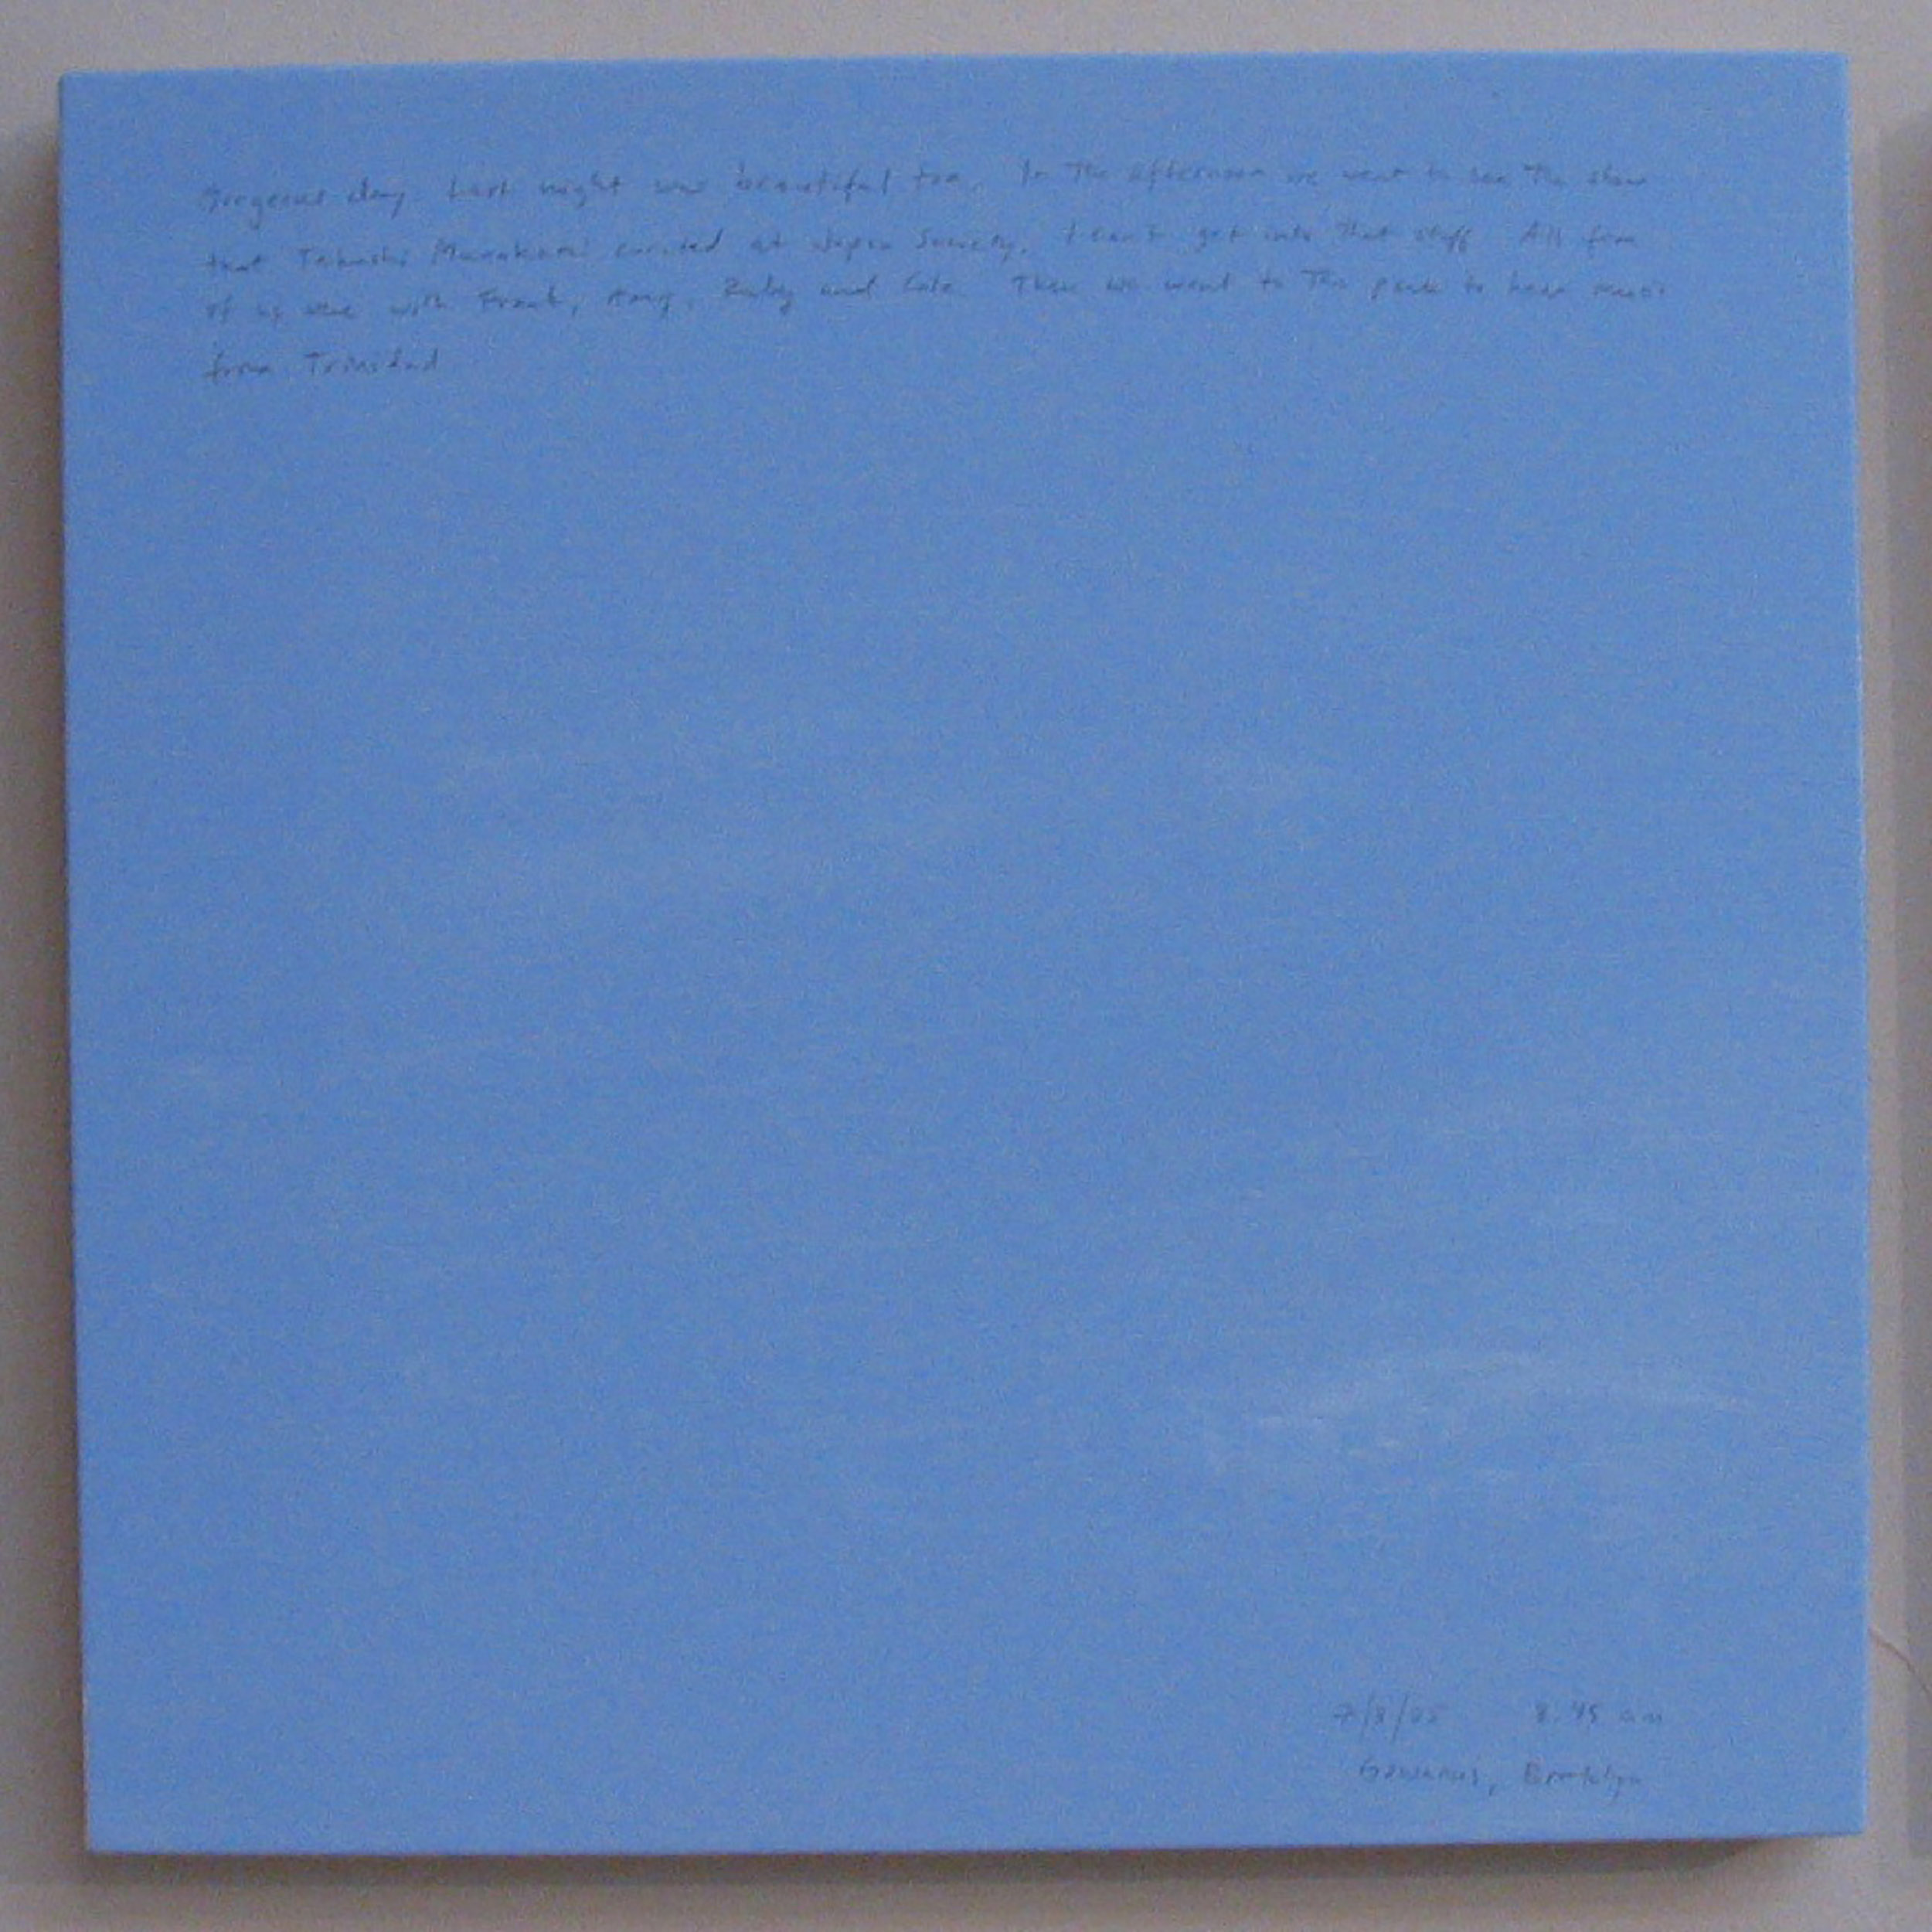 A 14 × 14 inch, acrylic painting of the sky. A journal entry is handwritten on the painting:

“Gorgeous day. Last night was beautiful too. In the afternoon we went to see the show that Takashi Murakami curated at Japan Society. I can’t get into that stuff. All five of us were with Frank, Amy, Ruby and Cole. Then we went to the park to hear music from Trinidad.  

7/3/05 8:45 am
Gowanus, Brooklyn”